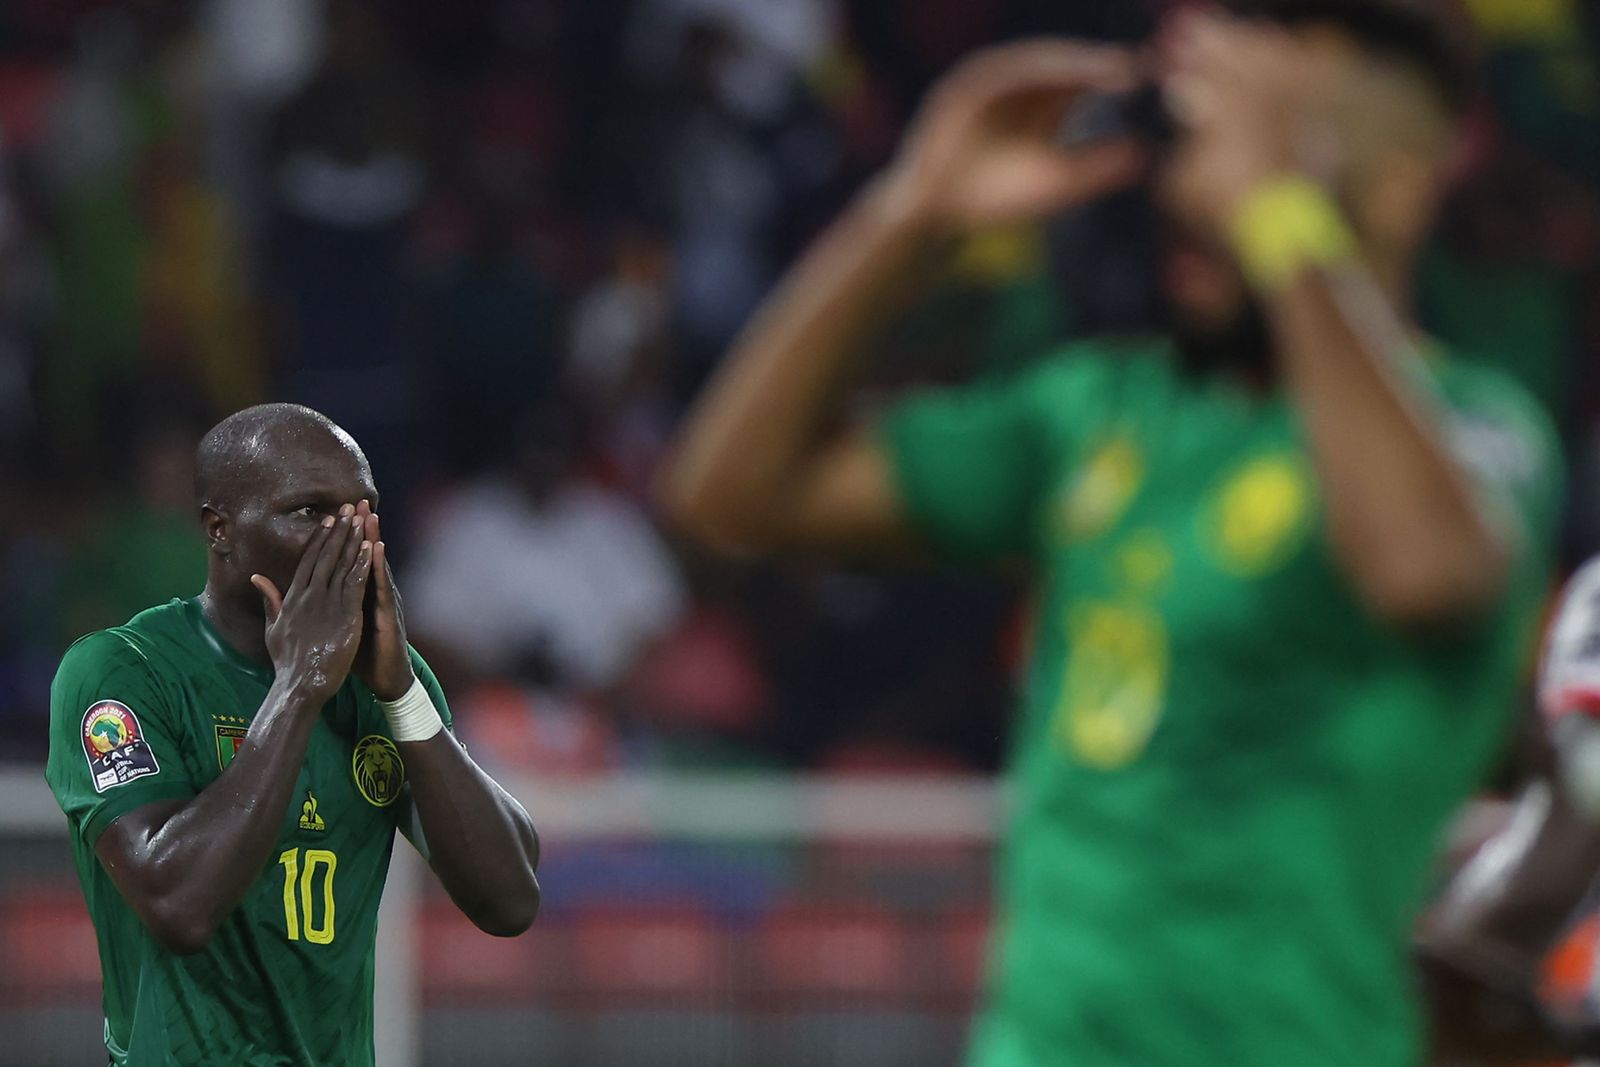 Cameroon's forward Vincent Aboubakar (L) reacts after shooting and failing to score during the Group A Africa Cup of Nations (CAN) 2021 football match between Cameroon and Burkina Faso at Stade d'Olemb� in Yaounde on January 9, 2022. (Photo by Kenzo Tribouillard / AFP) - AFP